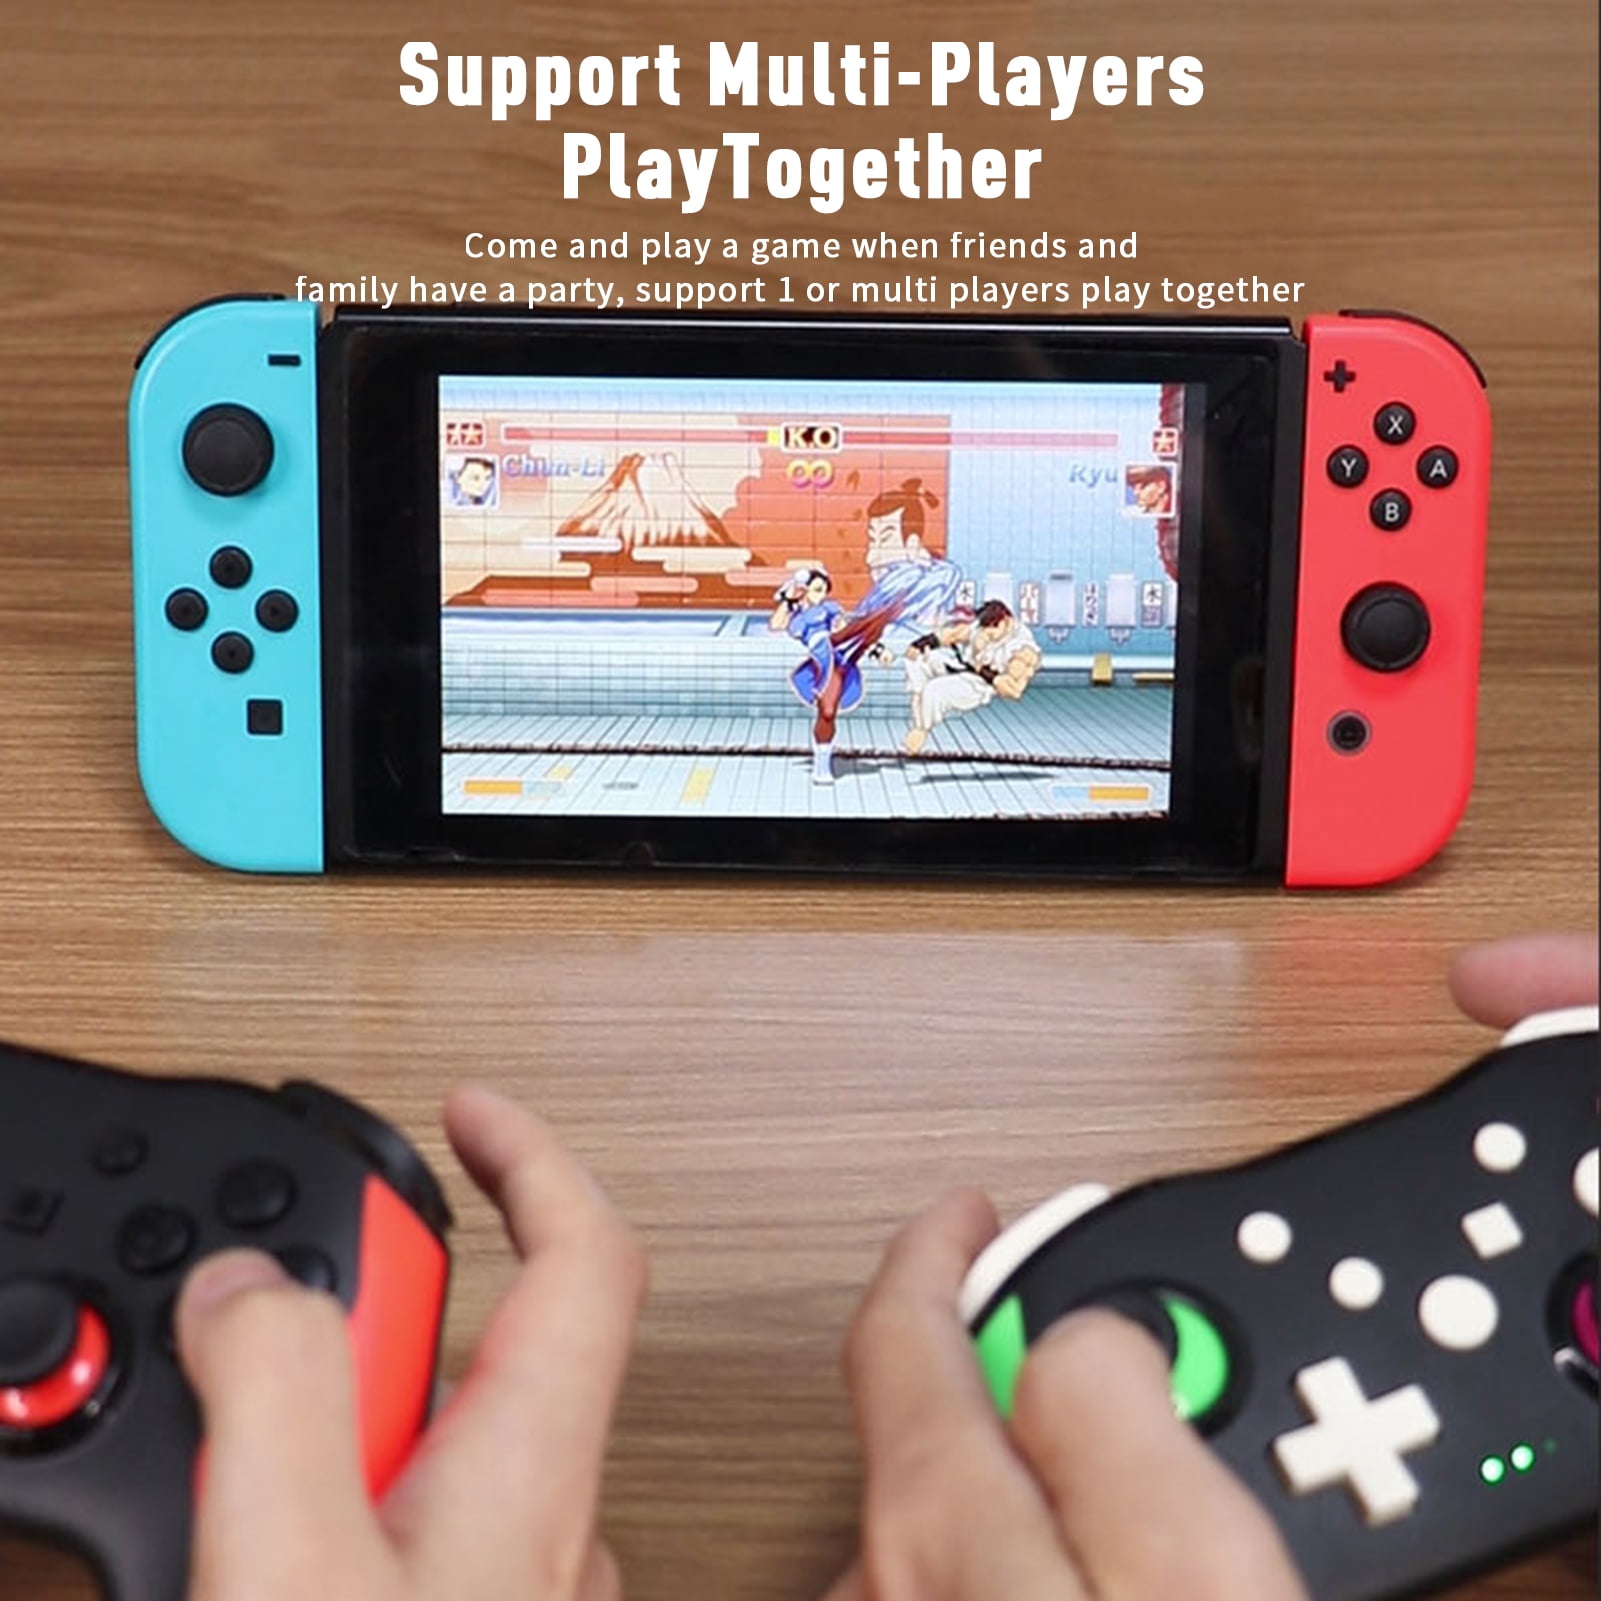 NYXI Chaos Pro controlle with Hall Joystick, Switch pro Controller Wireless  for Nintendo Switch/Lite/OLED, Hall Effect Controller with RGB Light